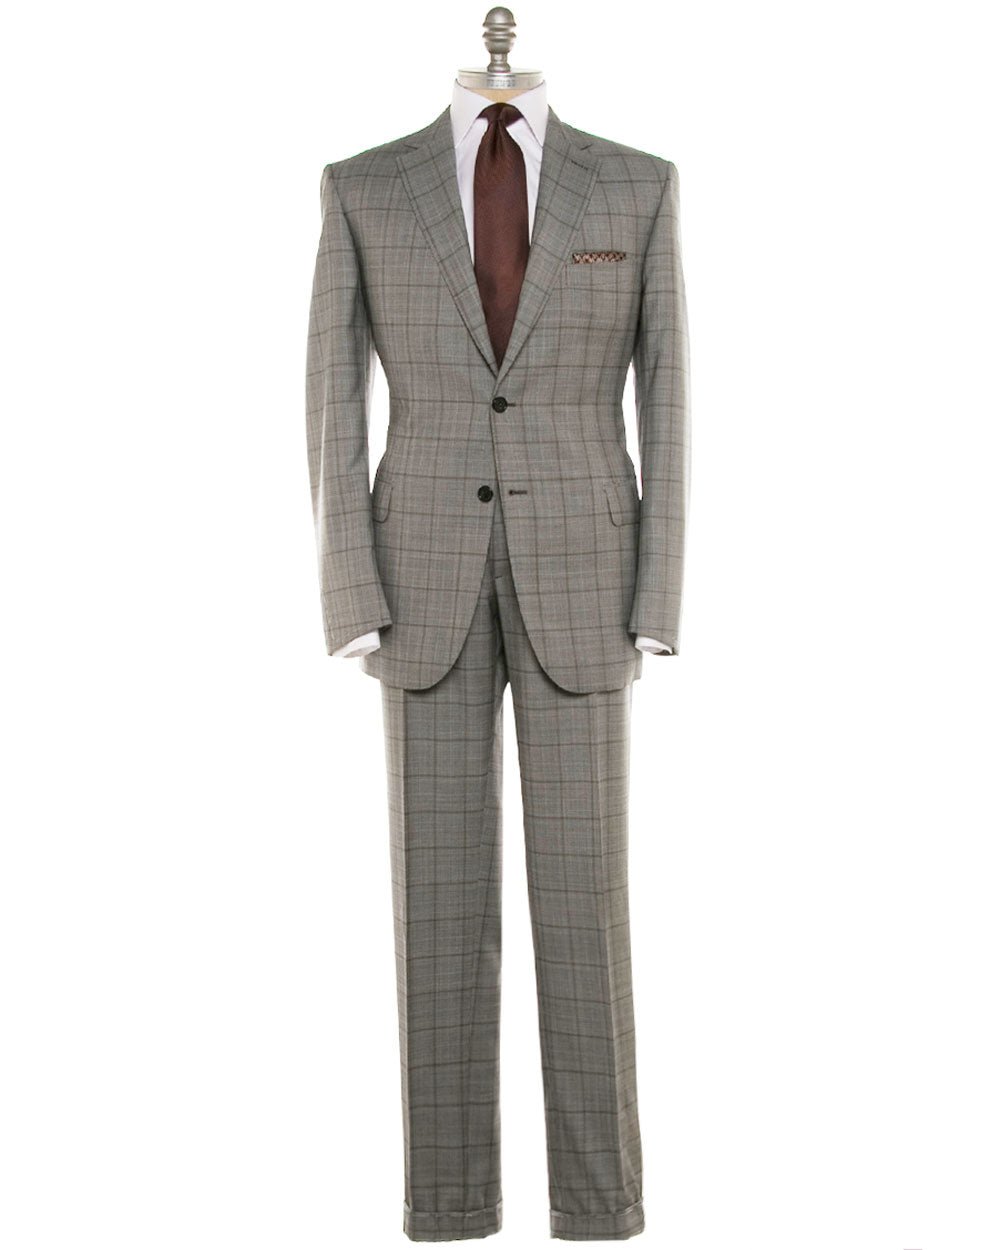 Brioni - Light Gray Sharkskin Wool Suit | Mitchell Stores